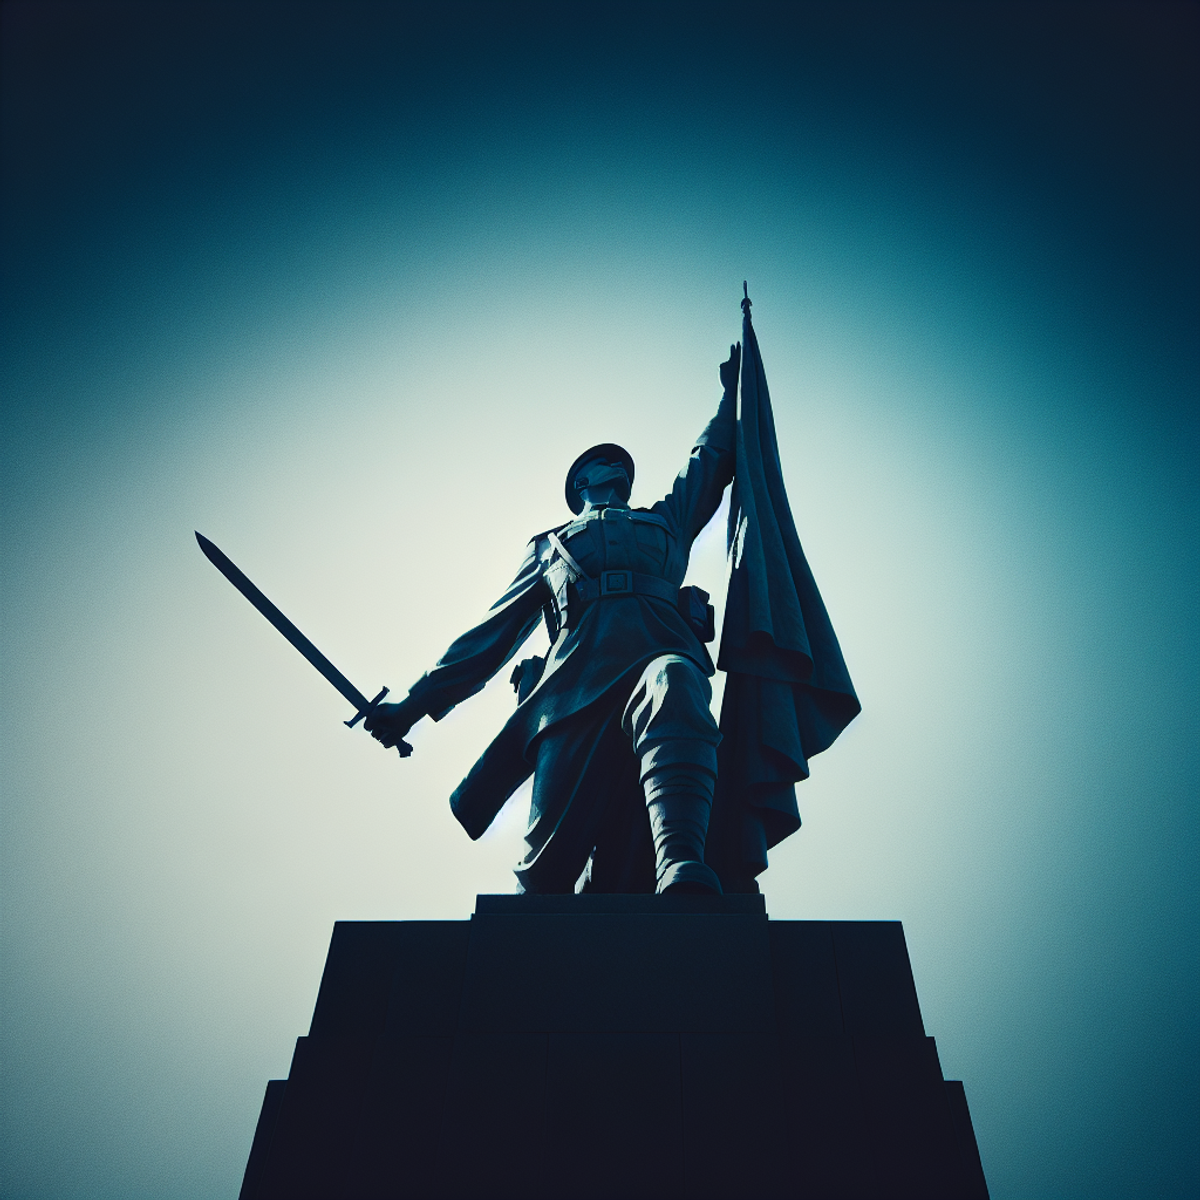 Sculpture of soldier holding flag and sword.